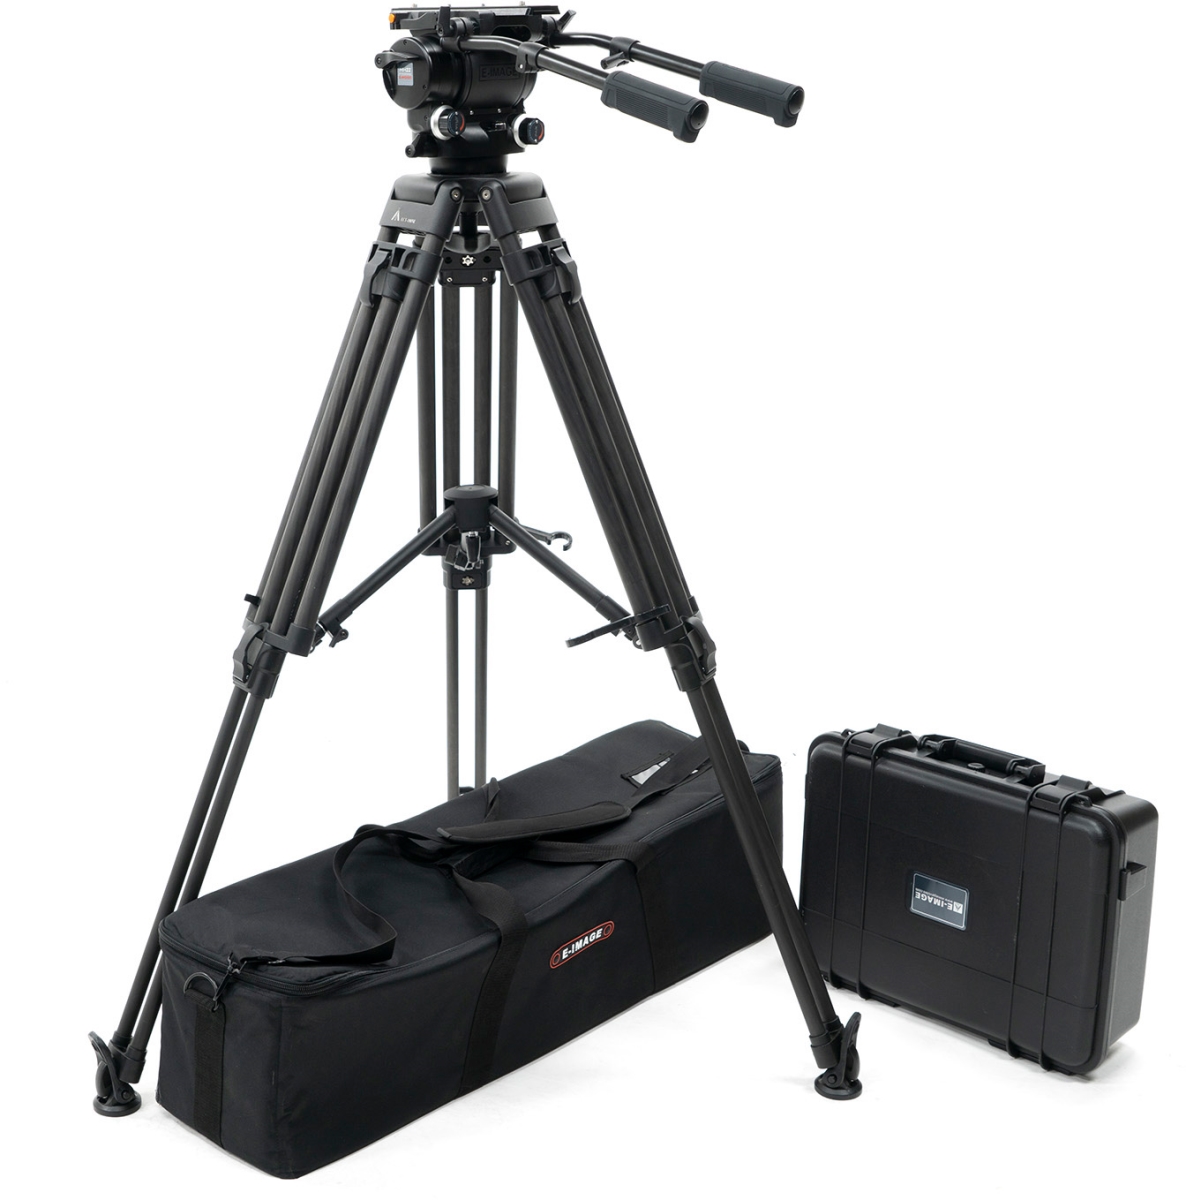 Picture of Eimage IKAN-MOTUS32 3-Stage Carbon Fiber Tripod Kit with 70.5 lbs Payload